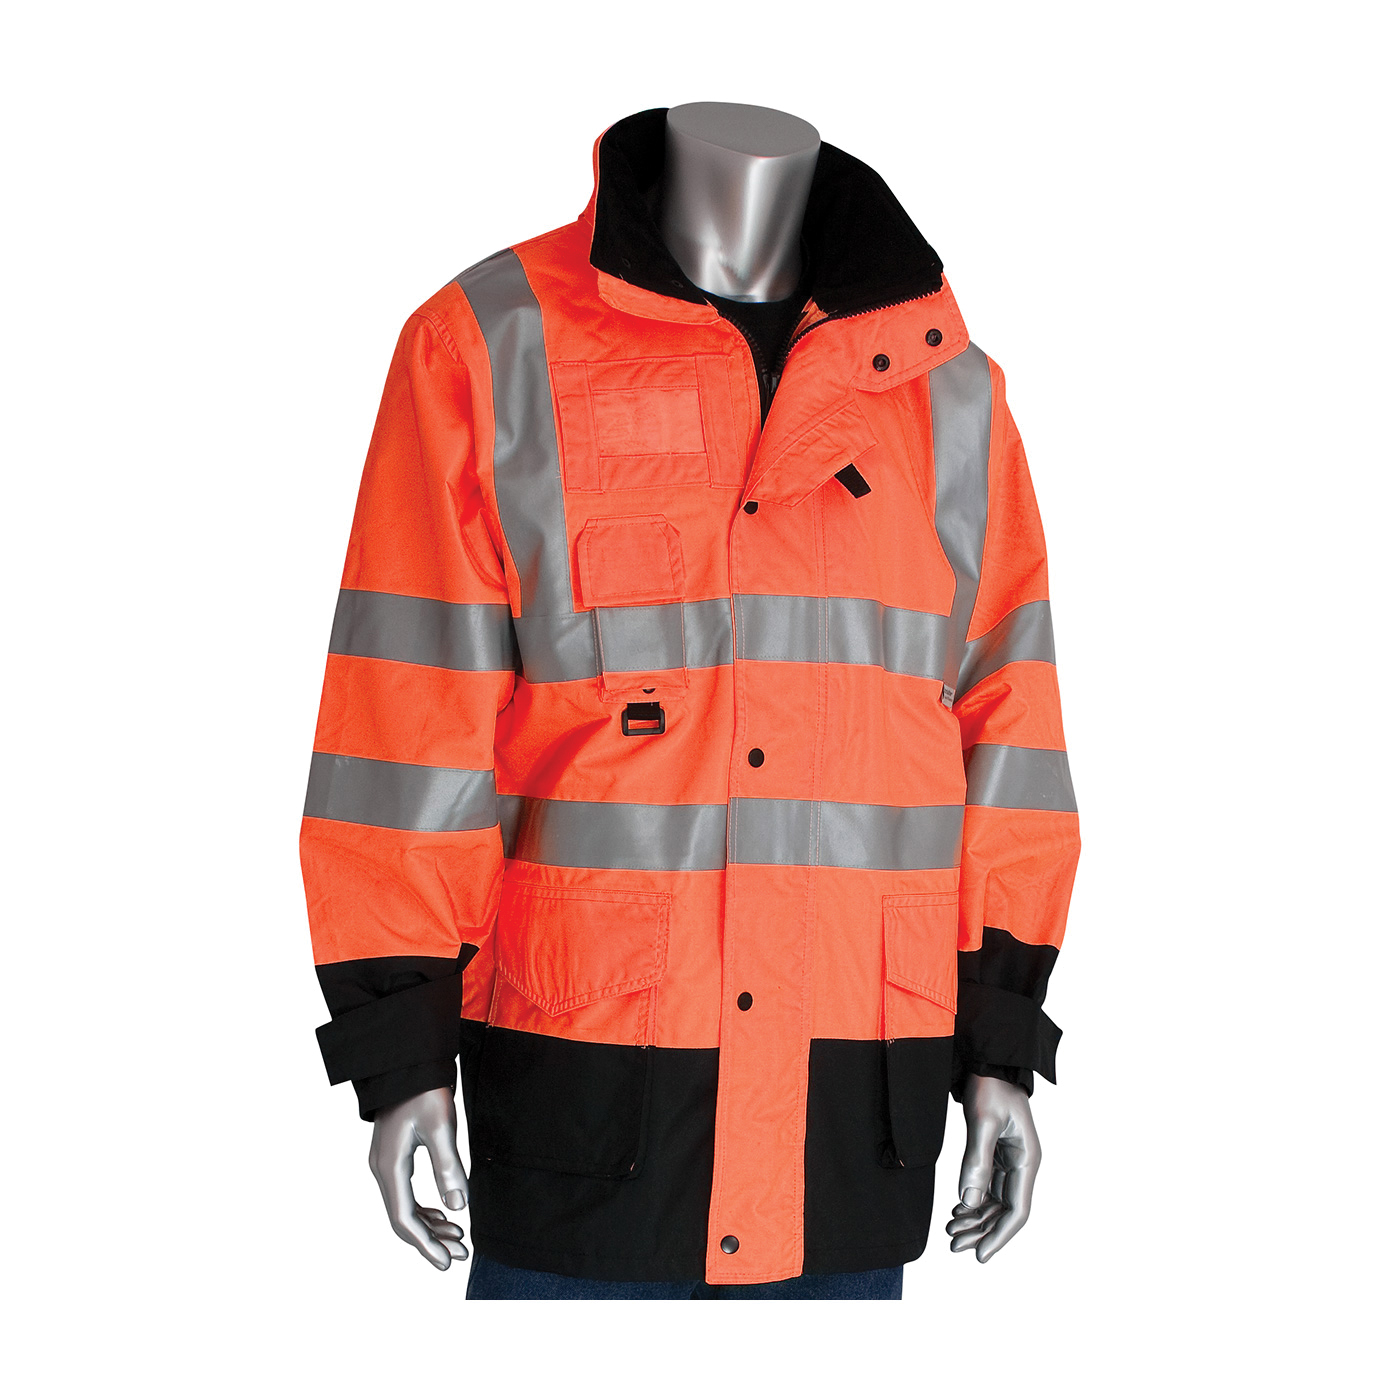 PIP® 343-1756-OR/4X 7-in-1 All Condition Winter Coat With Inner Jacket and Vest Combination, Hi-Viz Orange, Polyester, 67.3 in Chest, Resists: Water, Specifications Met: ANSI 107 Class 3 Type R